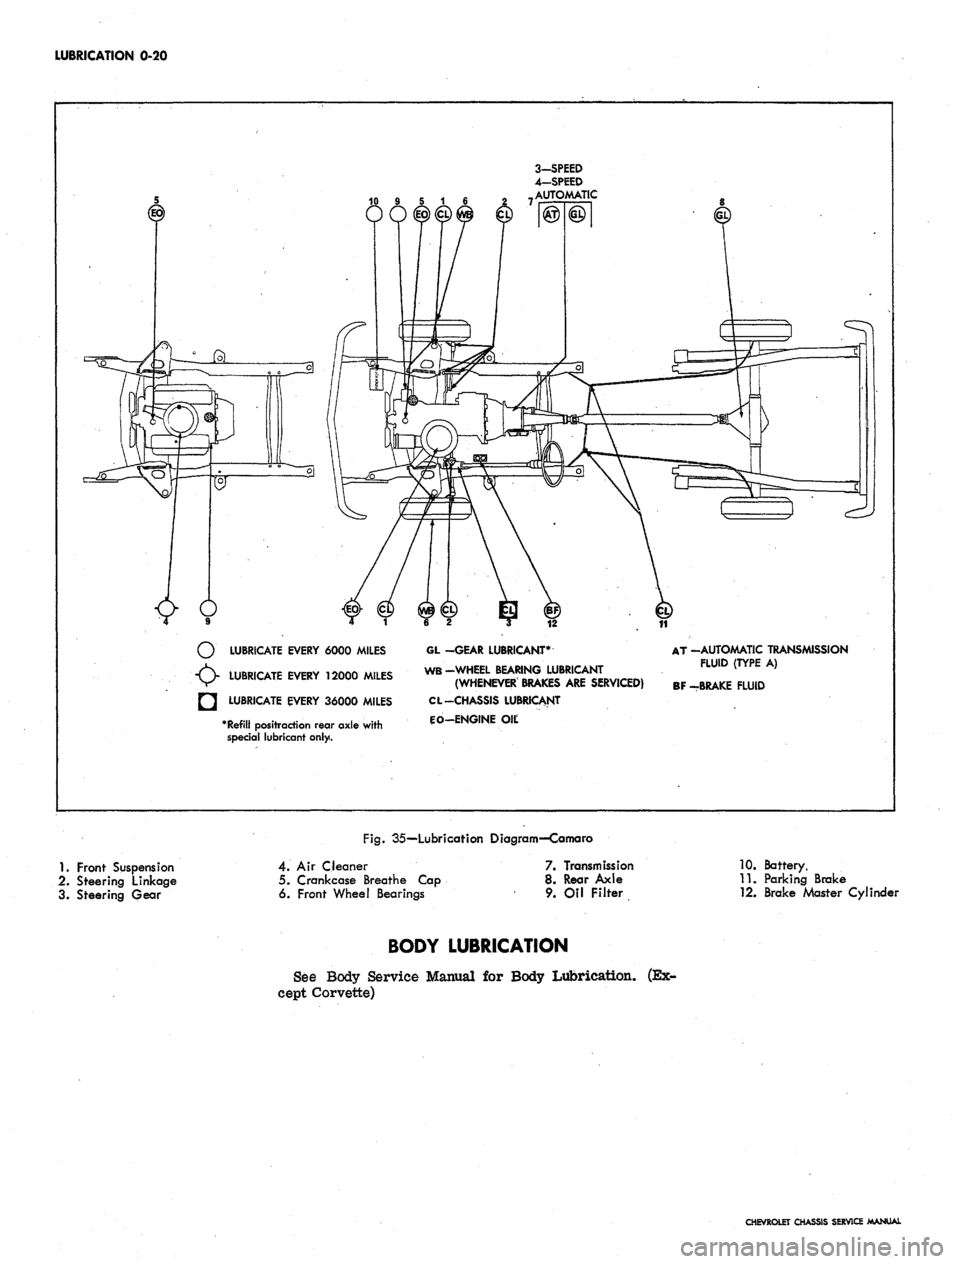 CHEVROLET CAMARO 1967 1.G Chassis User Guide 
LUBRICATION 0-20

3-SPEED

4—SPEED

AUTOMATIC

LUBRICATE EVERY 6000 MILES

LUBRICATE EVERY 12000 MILES

LUBRICATE EVERY 36000 MILES

*
 Refill
 positraction rear axle with

special lubricant only. 